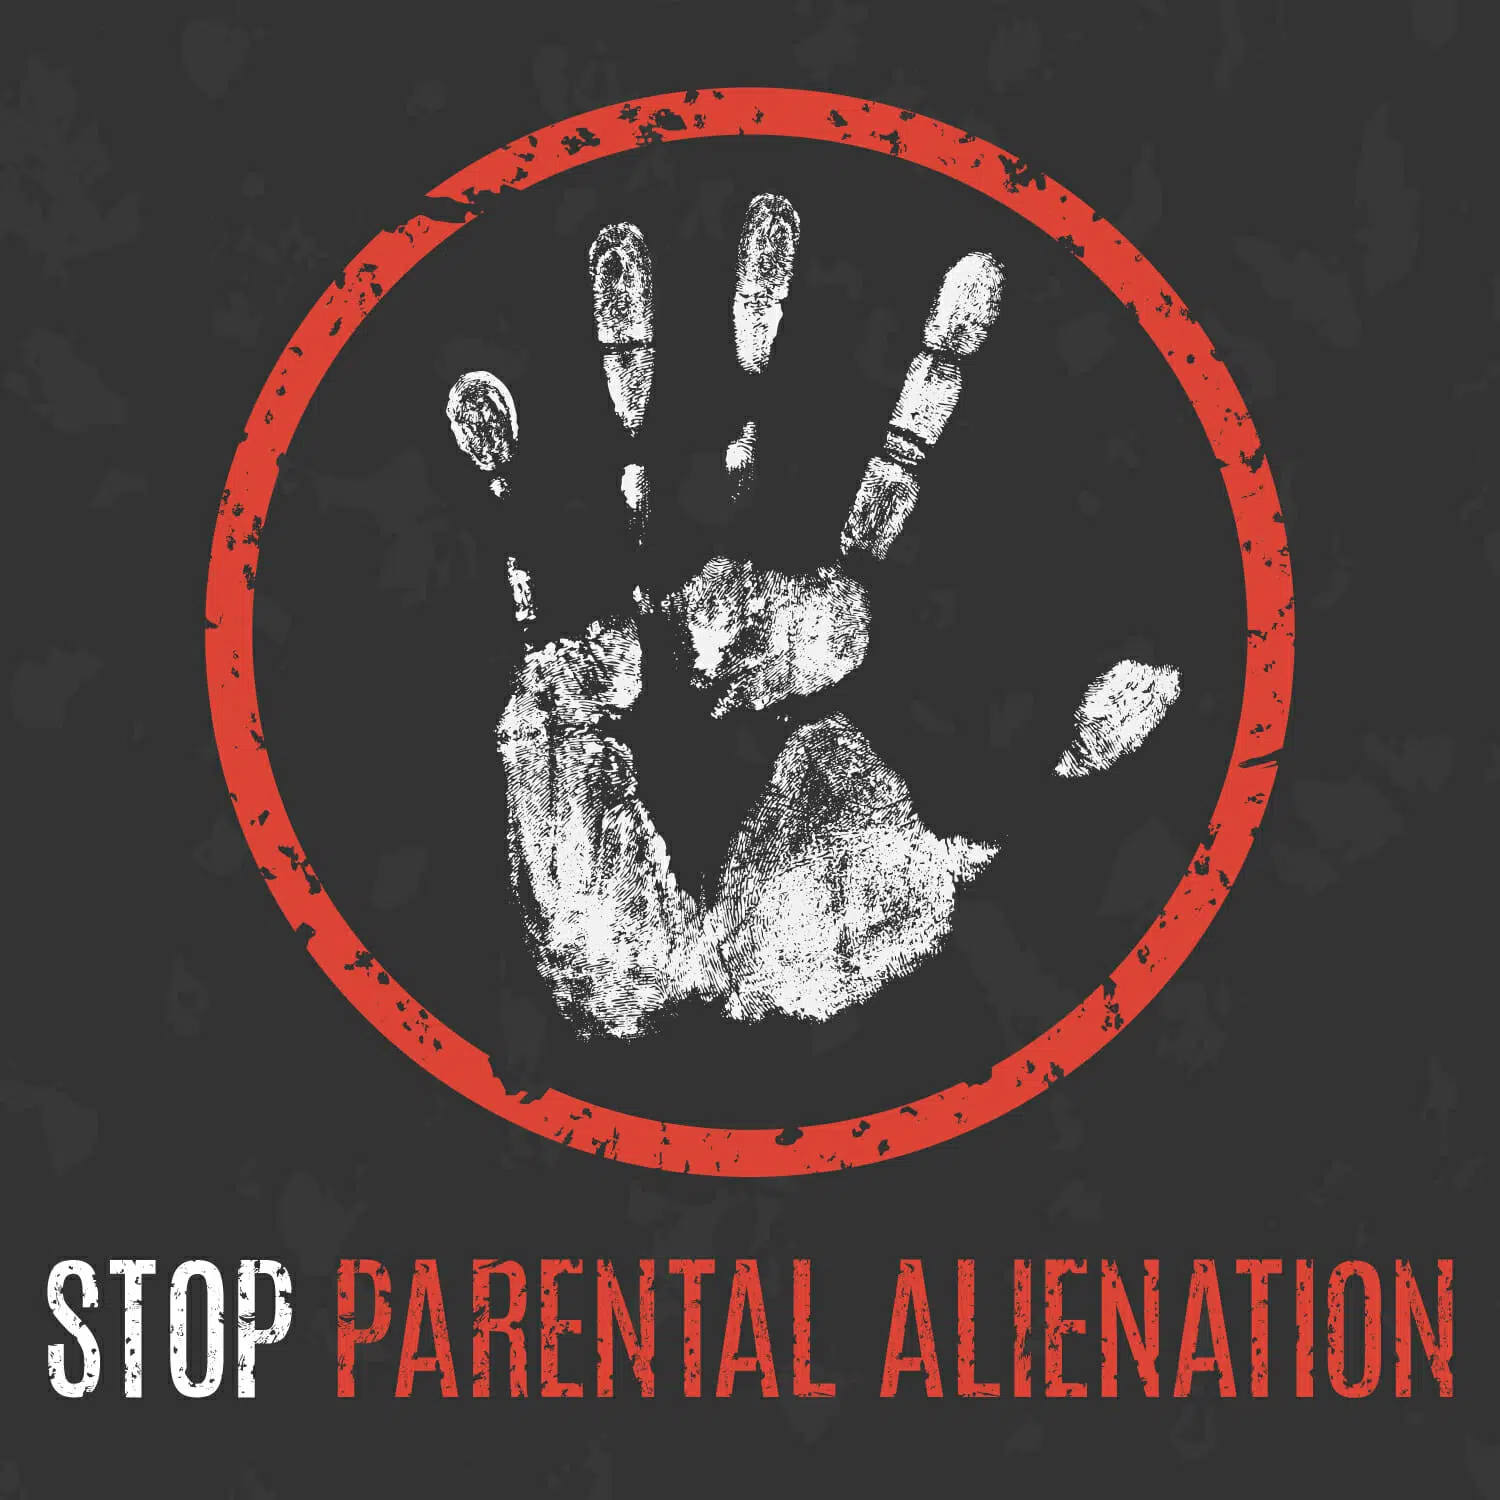 parental alienation and what you can do to stop it